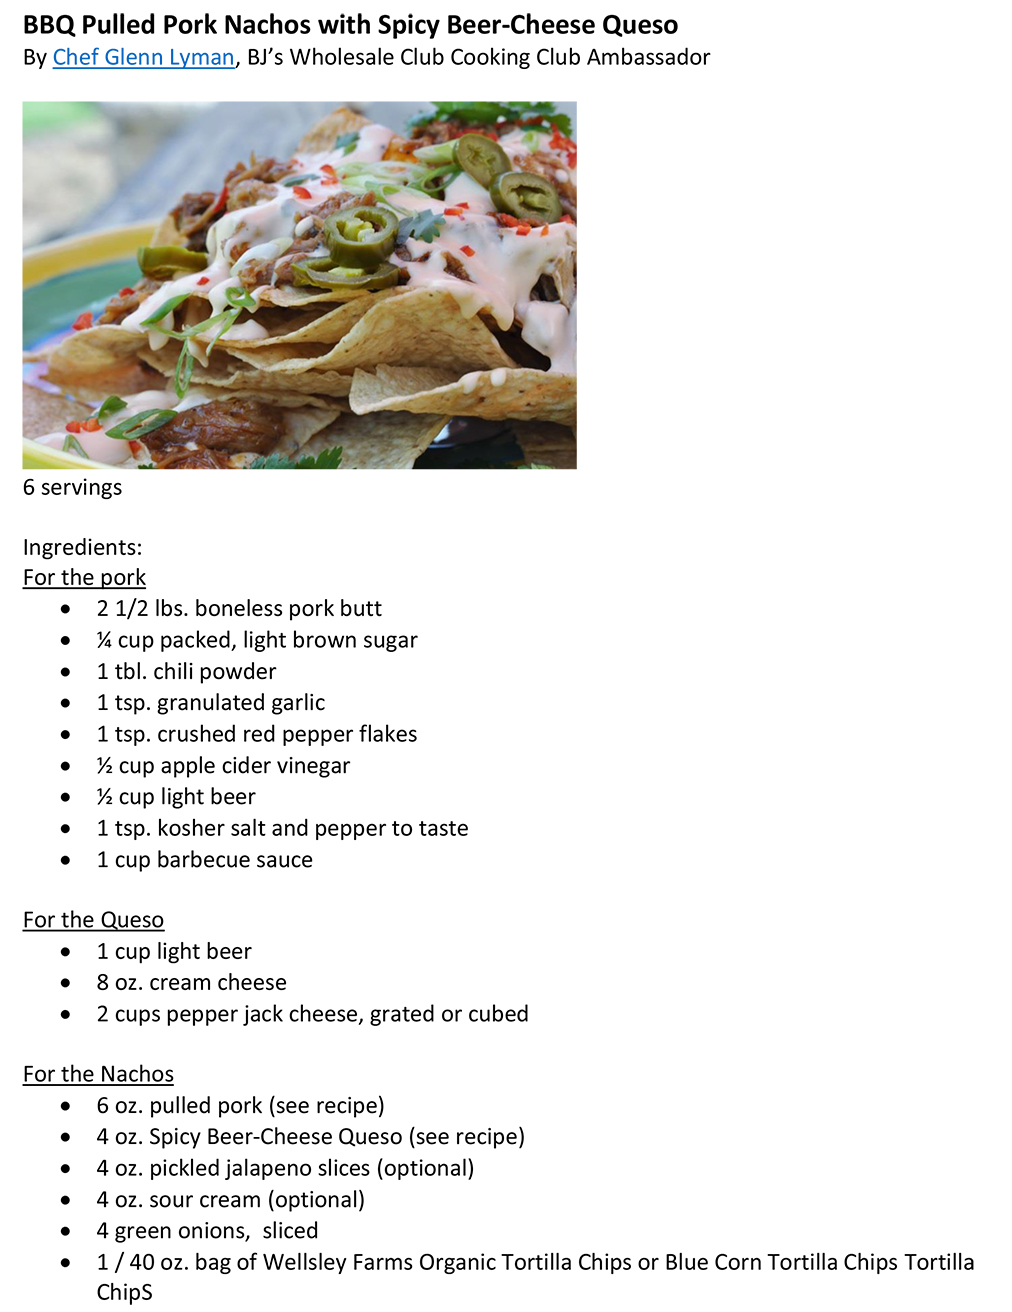 BBQ Pulled Pork Nachos with Spicy-Beer Queso Dip